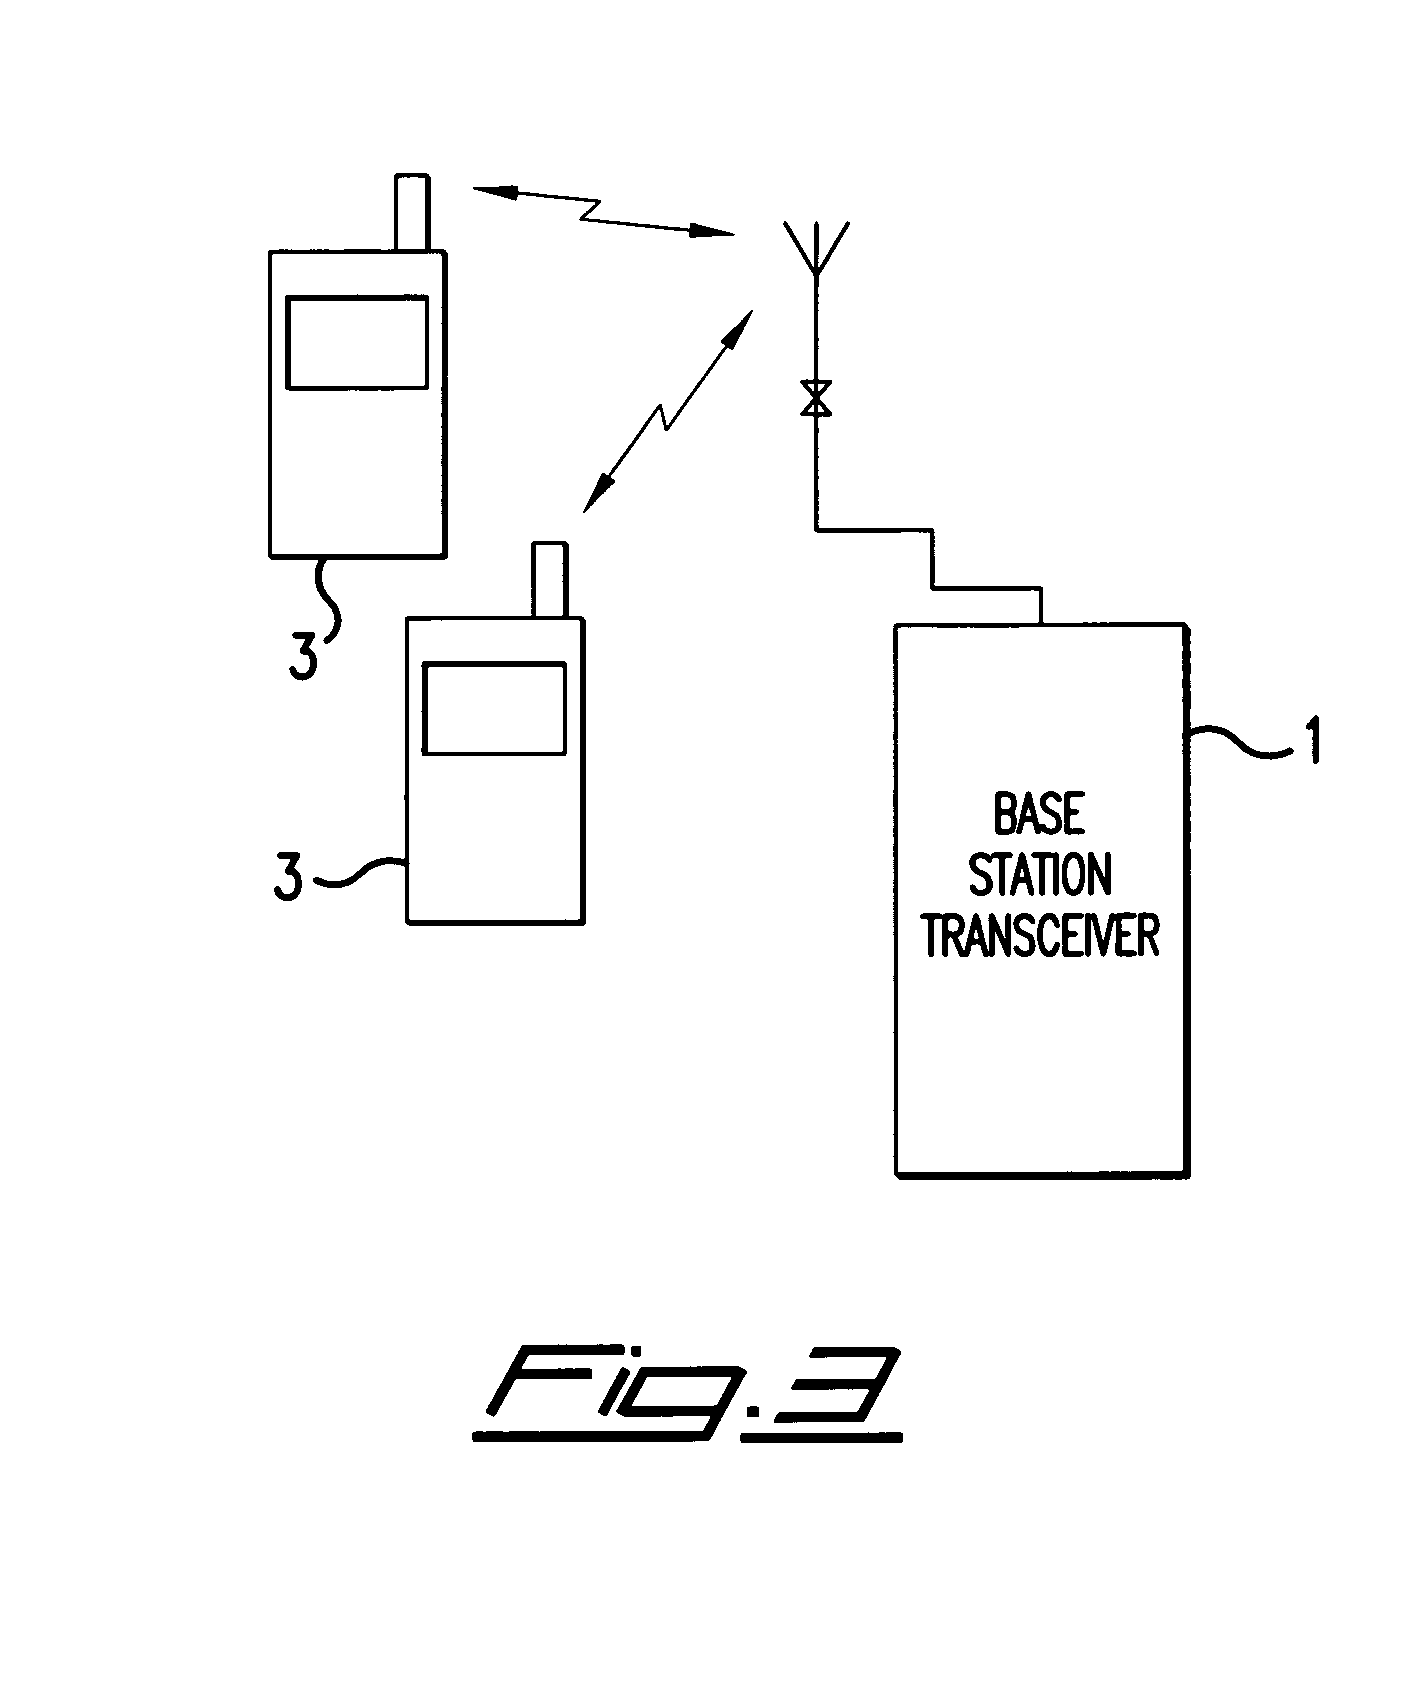 Method and system to synchronize mobile units to a base transceiver station